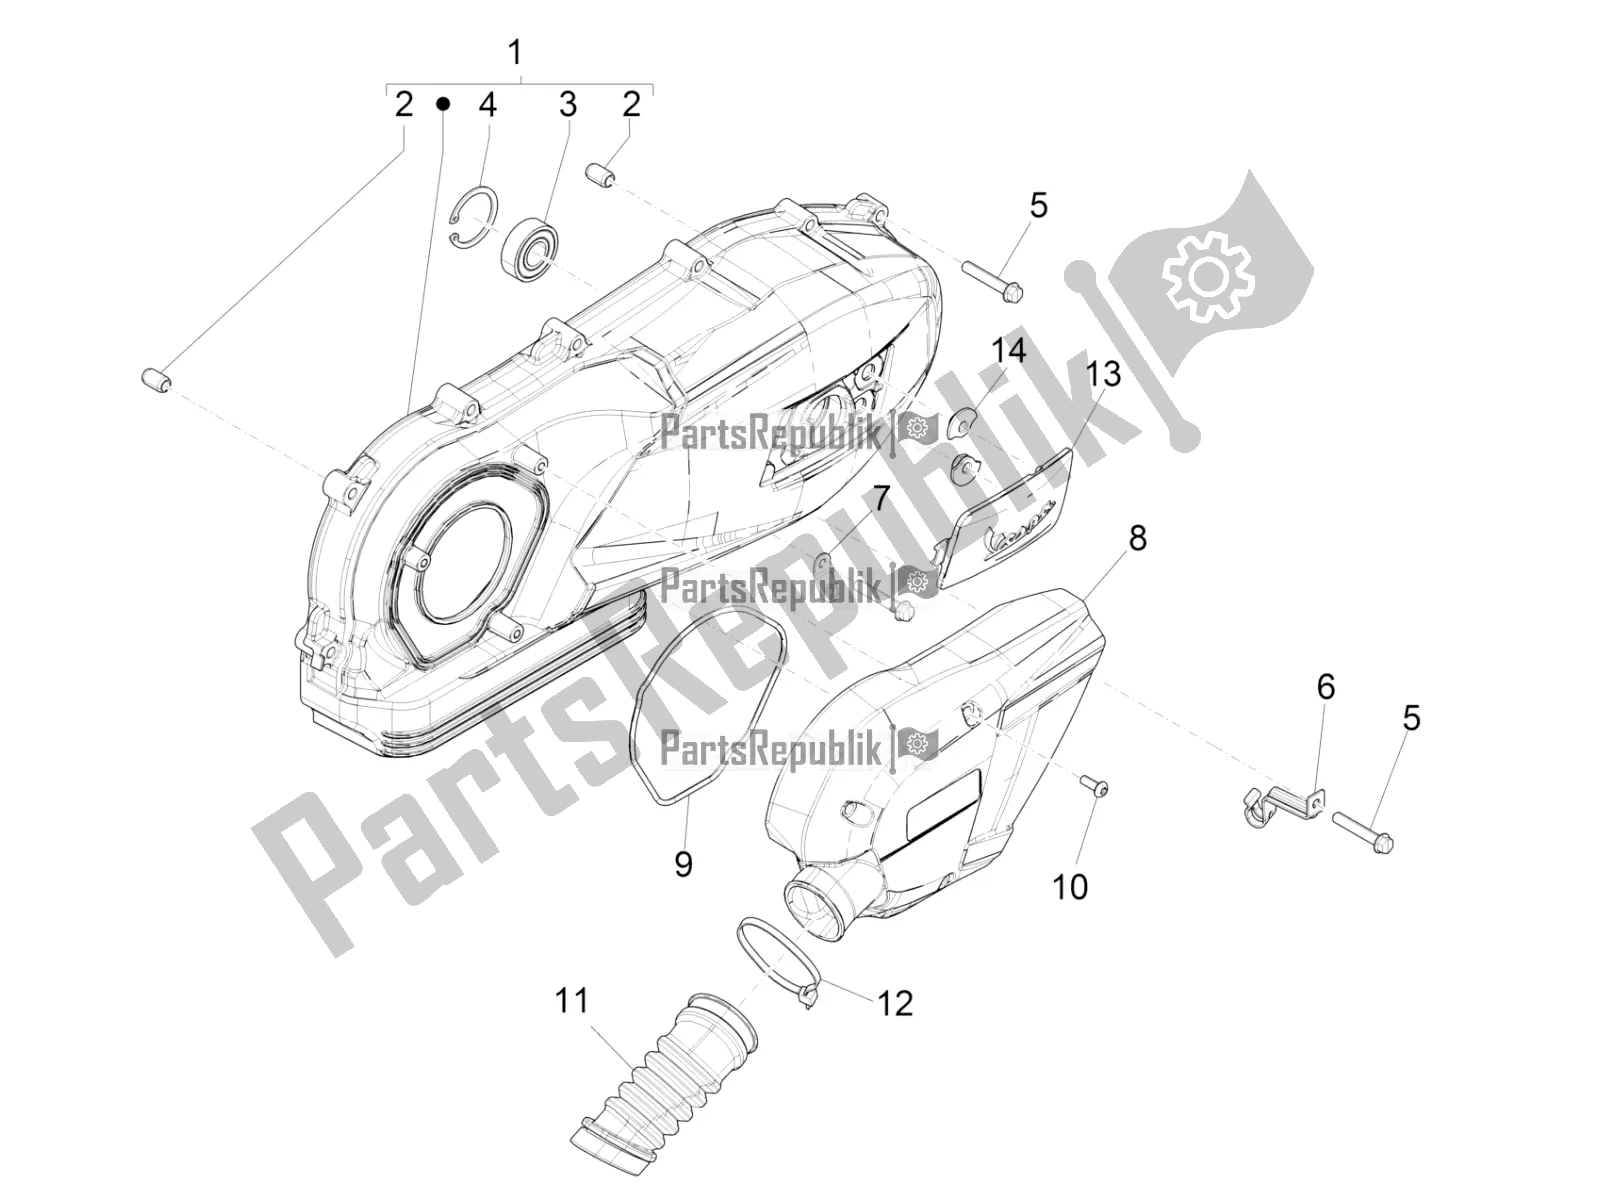 All parts for the Crankcase Cover - Crankcase Cooling of the Vespa Sprint 150 Iget ABS Apac 2022